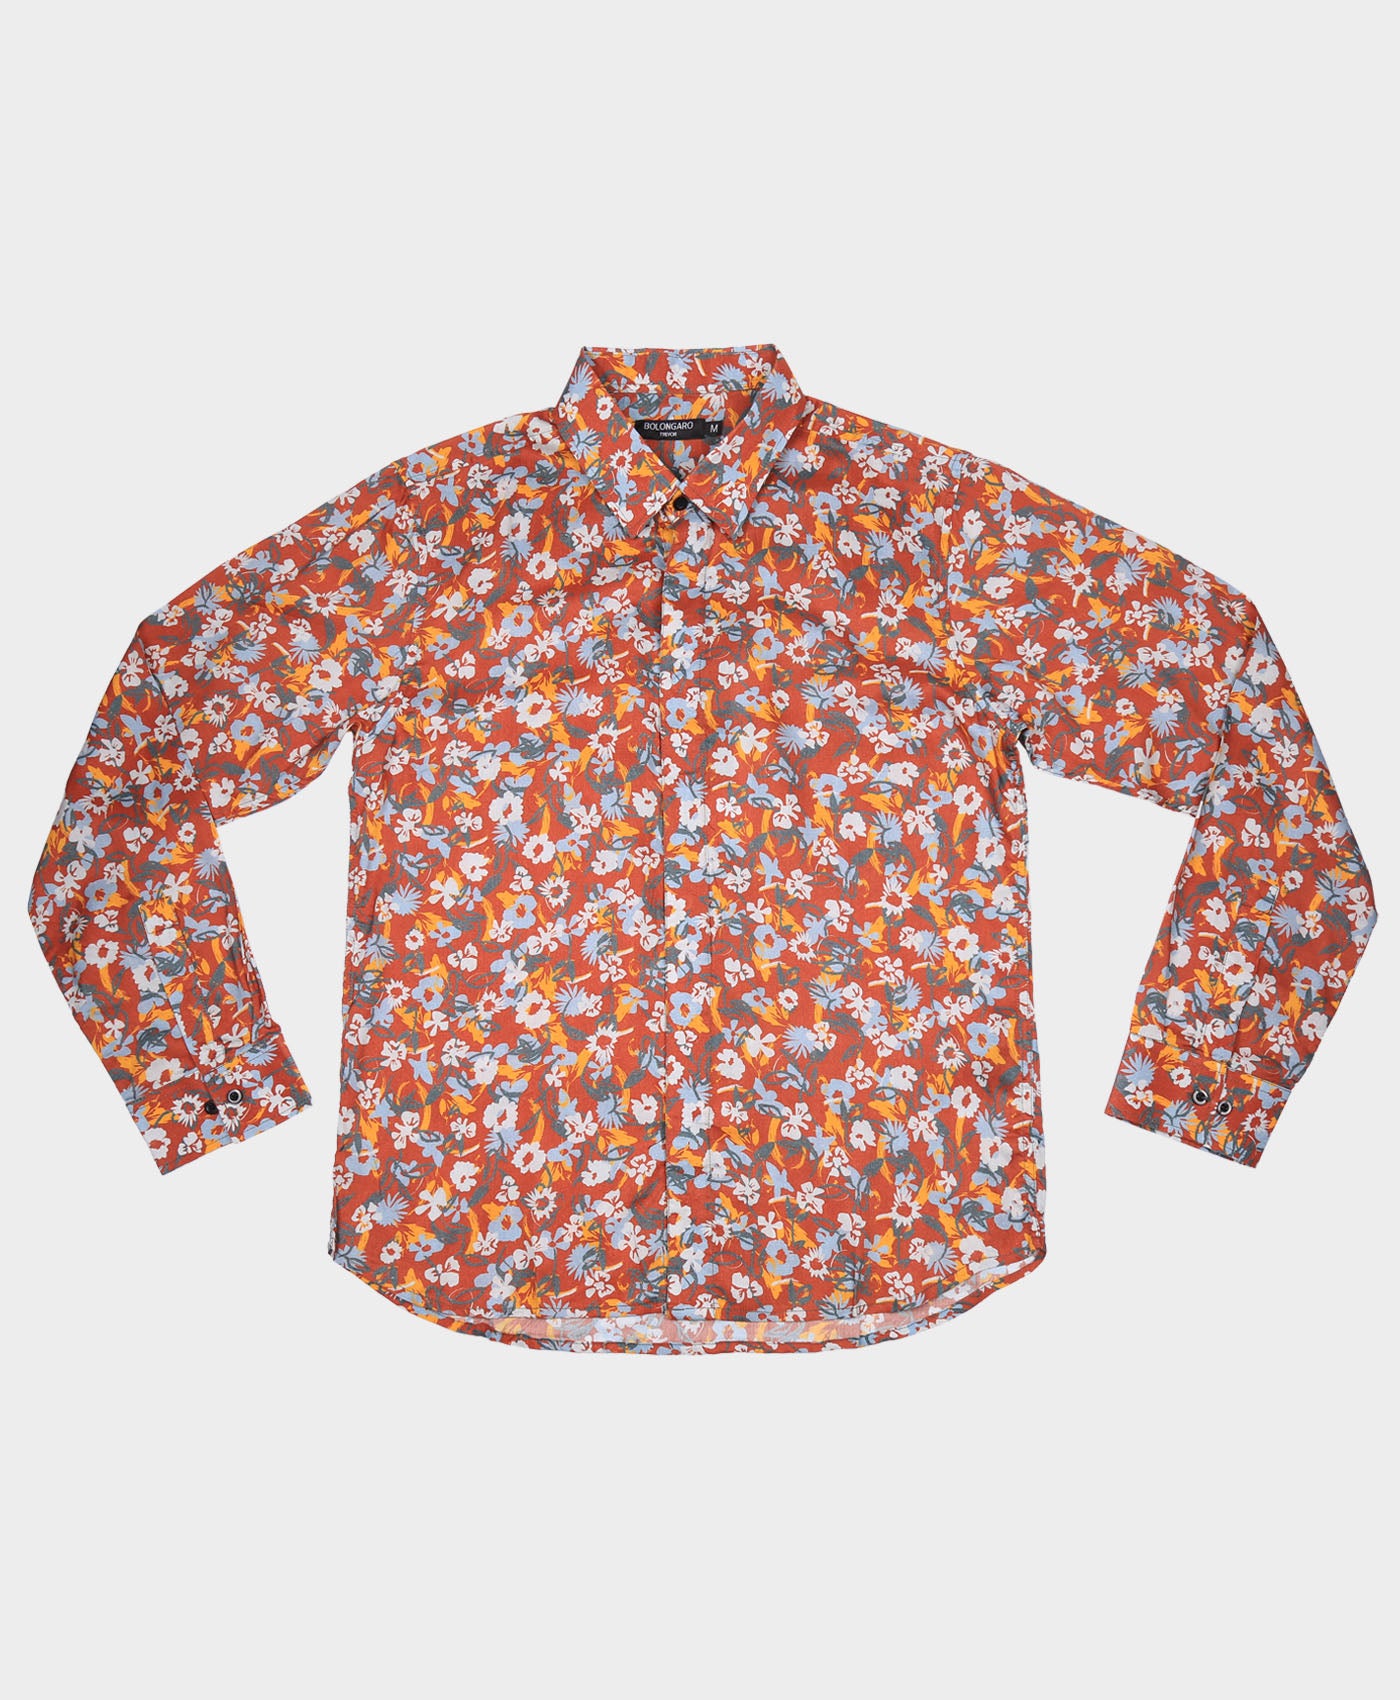 Long Sleeve Floral Shirt Navy and Orange